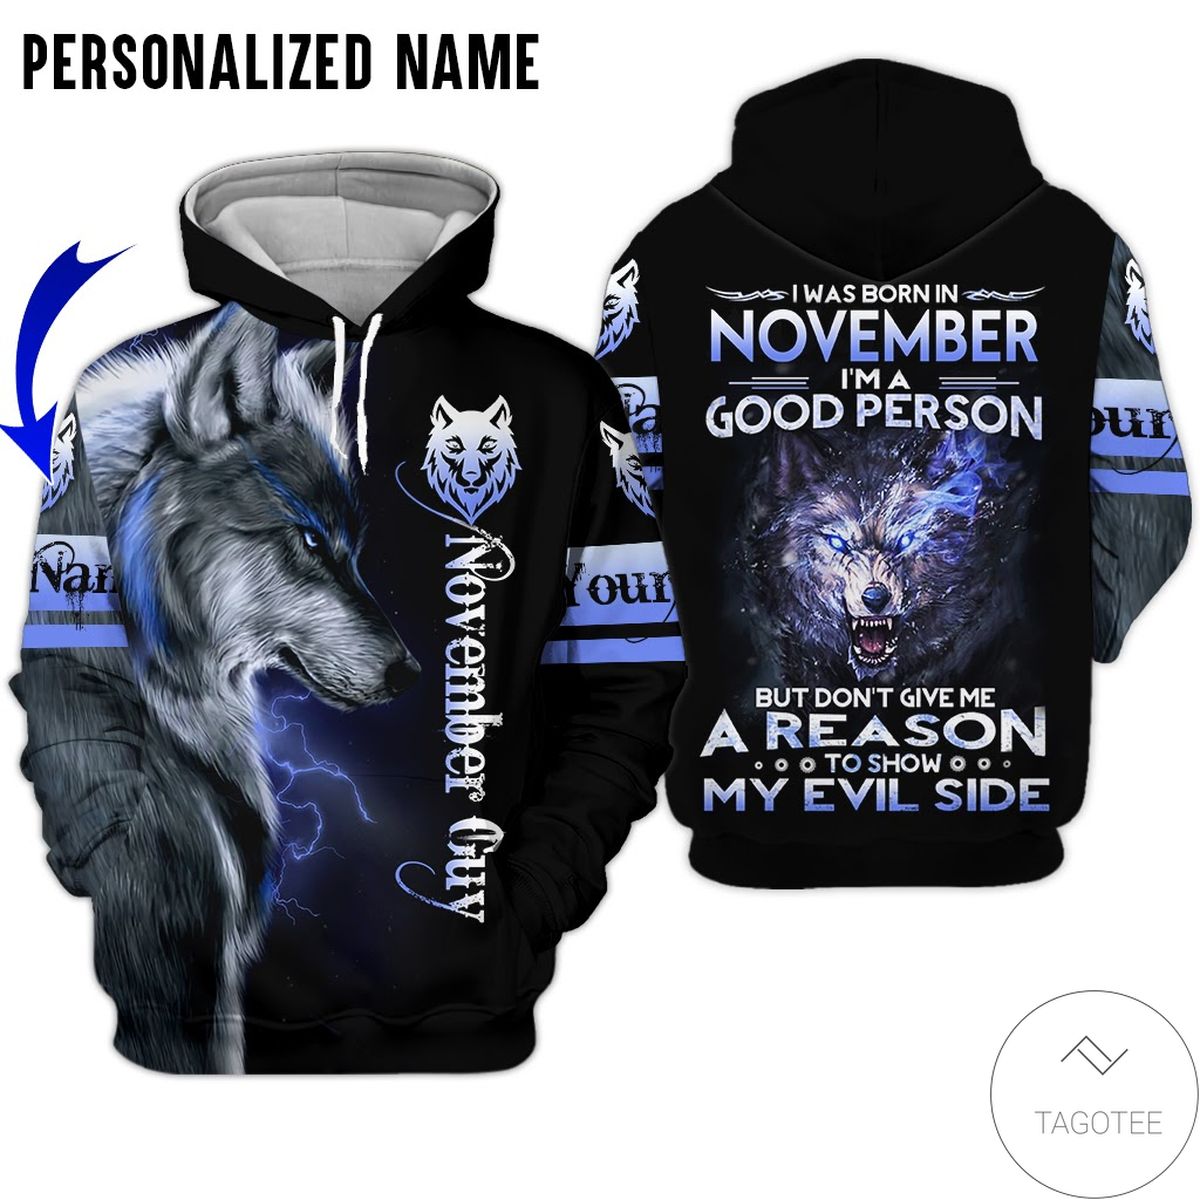 Personalized Name November Guy I'm A Good Person Show My Evil Inside 3d Hoodie